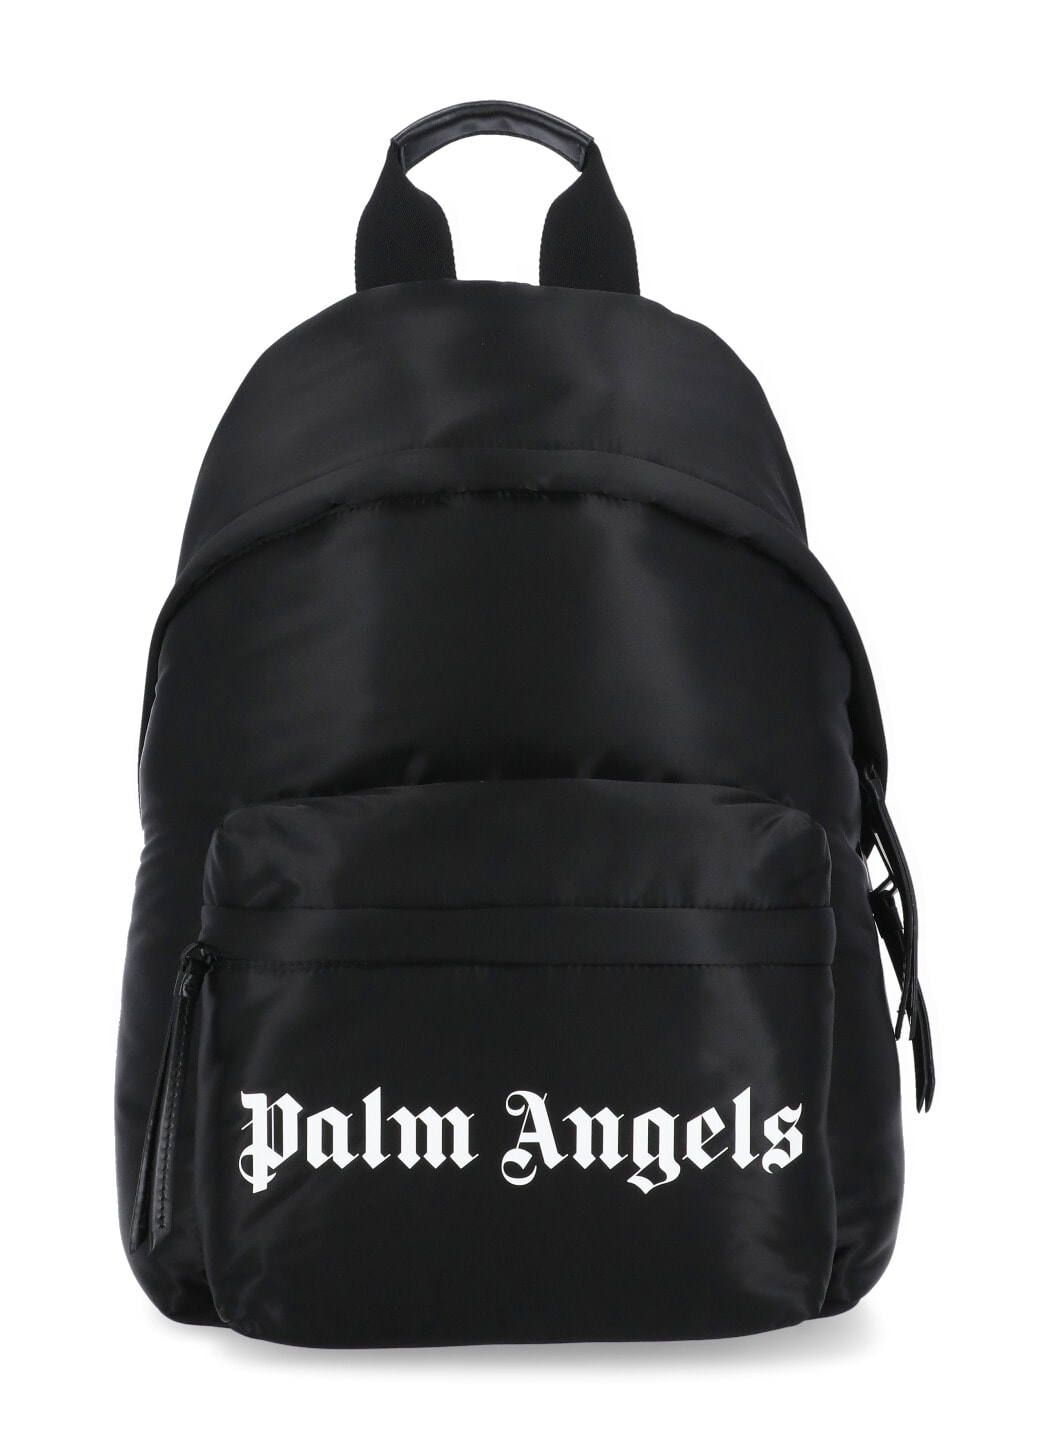 Palm Angels Logoed Backpack